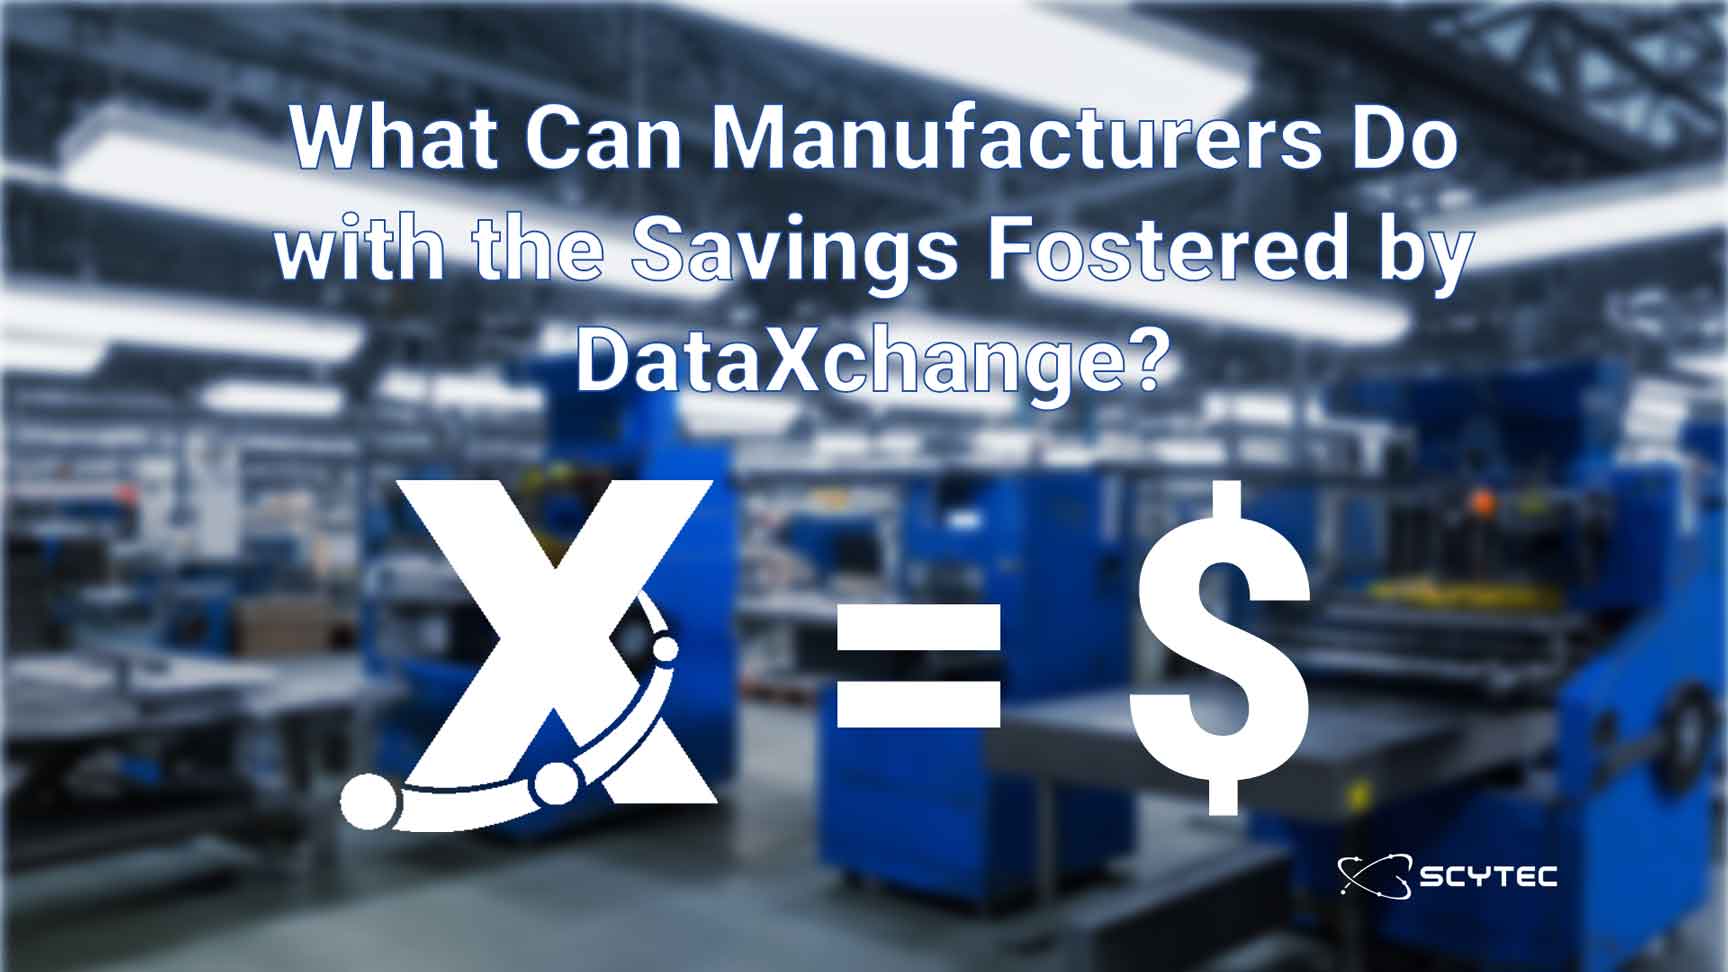 What Can Manufacturers Do with the Savings Fostered by DataXchange?